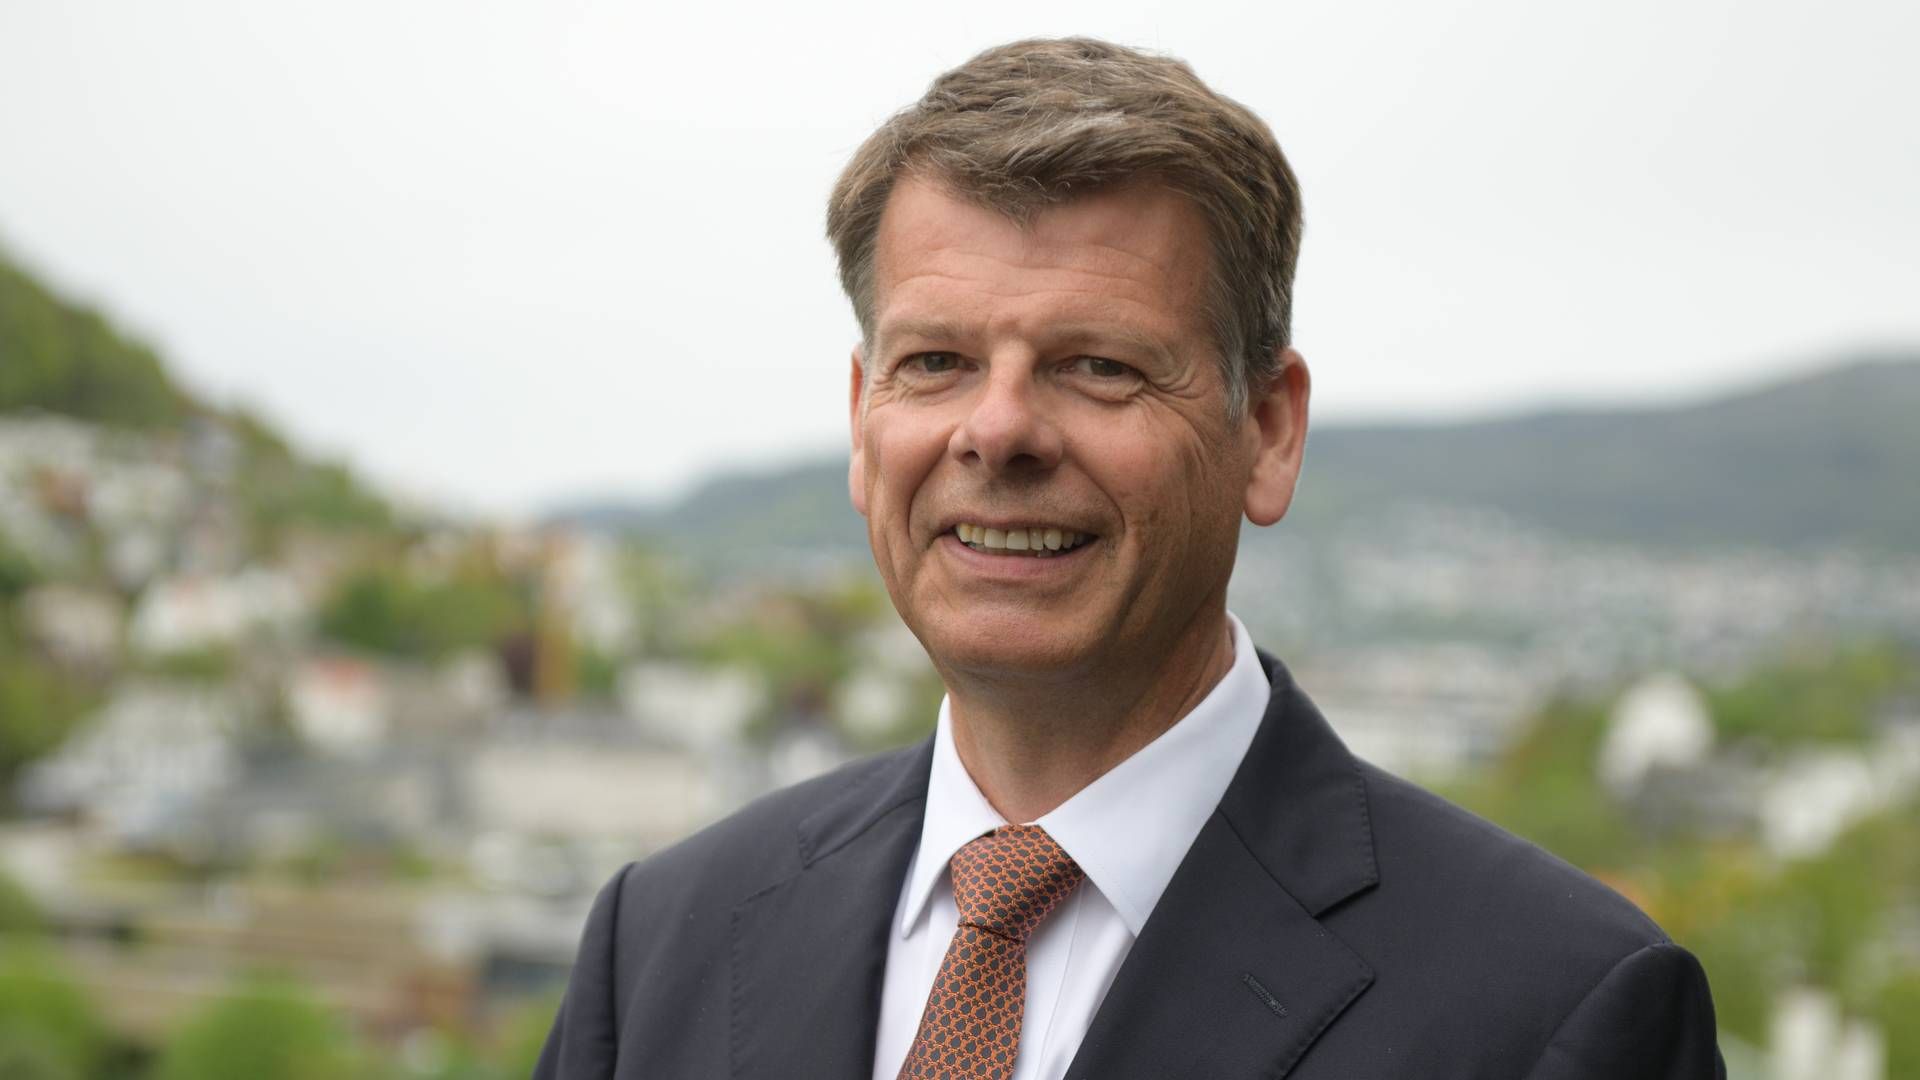 Harald Fotland is chief executive of Bergen-based Odfjell. | Photo: Gunnar Eide / Odfjell